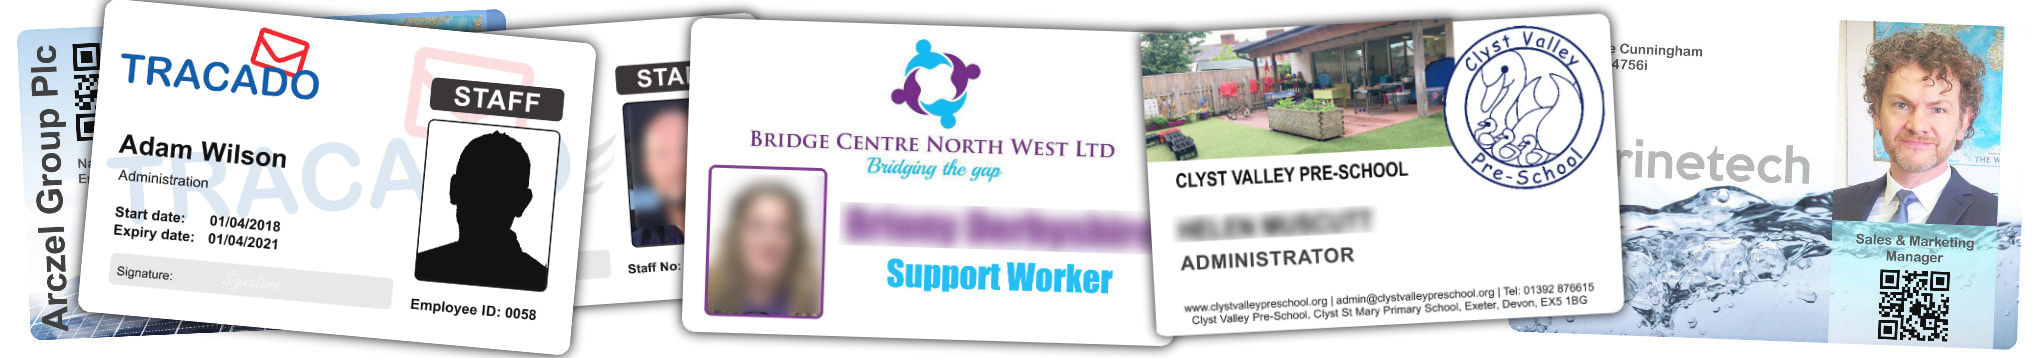 St. Alban's examples of staff photo ID cards | samples of employee Identity card printing | Workers ID cards printed in 